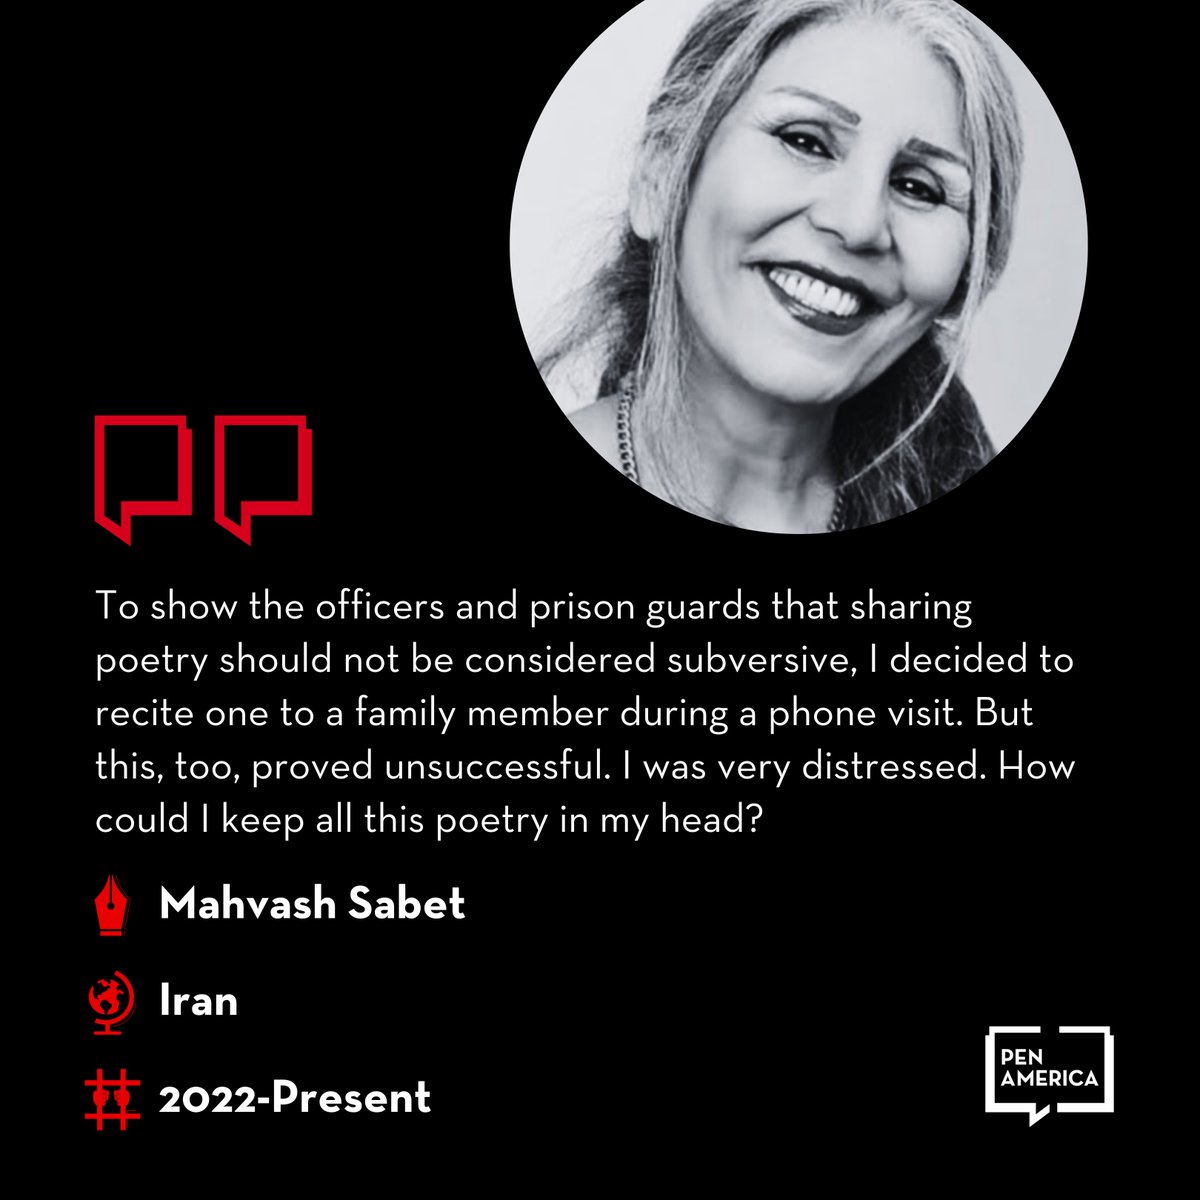 Mahvash Sabet is a poet and Baha’i educator serving a 10-year prison sentence, and one of 49 writers unjustly jailed in Iran for their free expression. In the 2023 Freedom to Write Index, #Iran ranked 2nd in the top 10 list of countries jailing writers: pen.org/report/freedom…